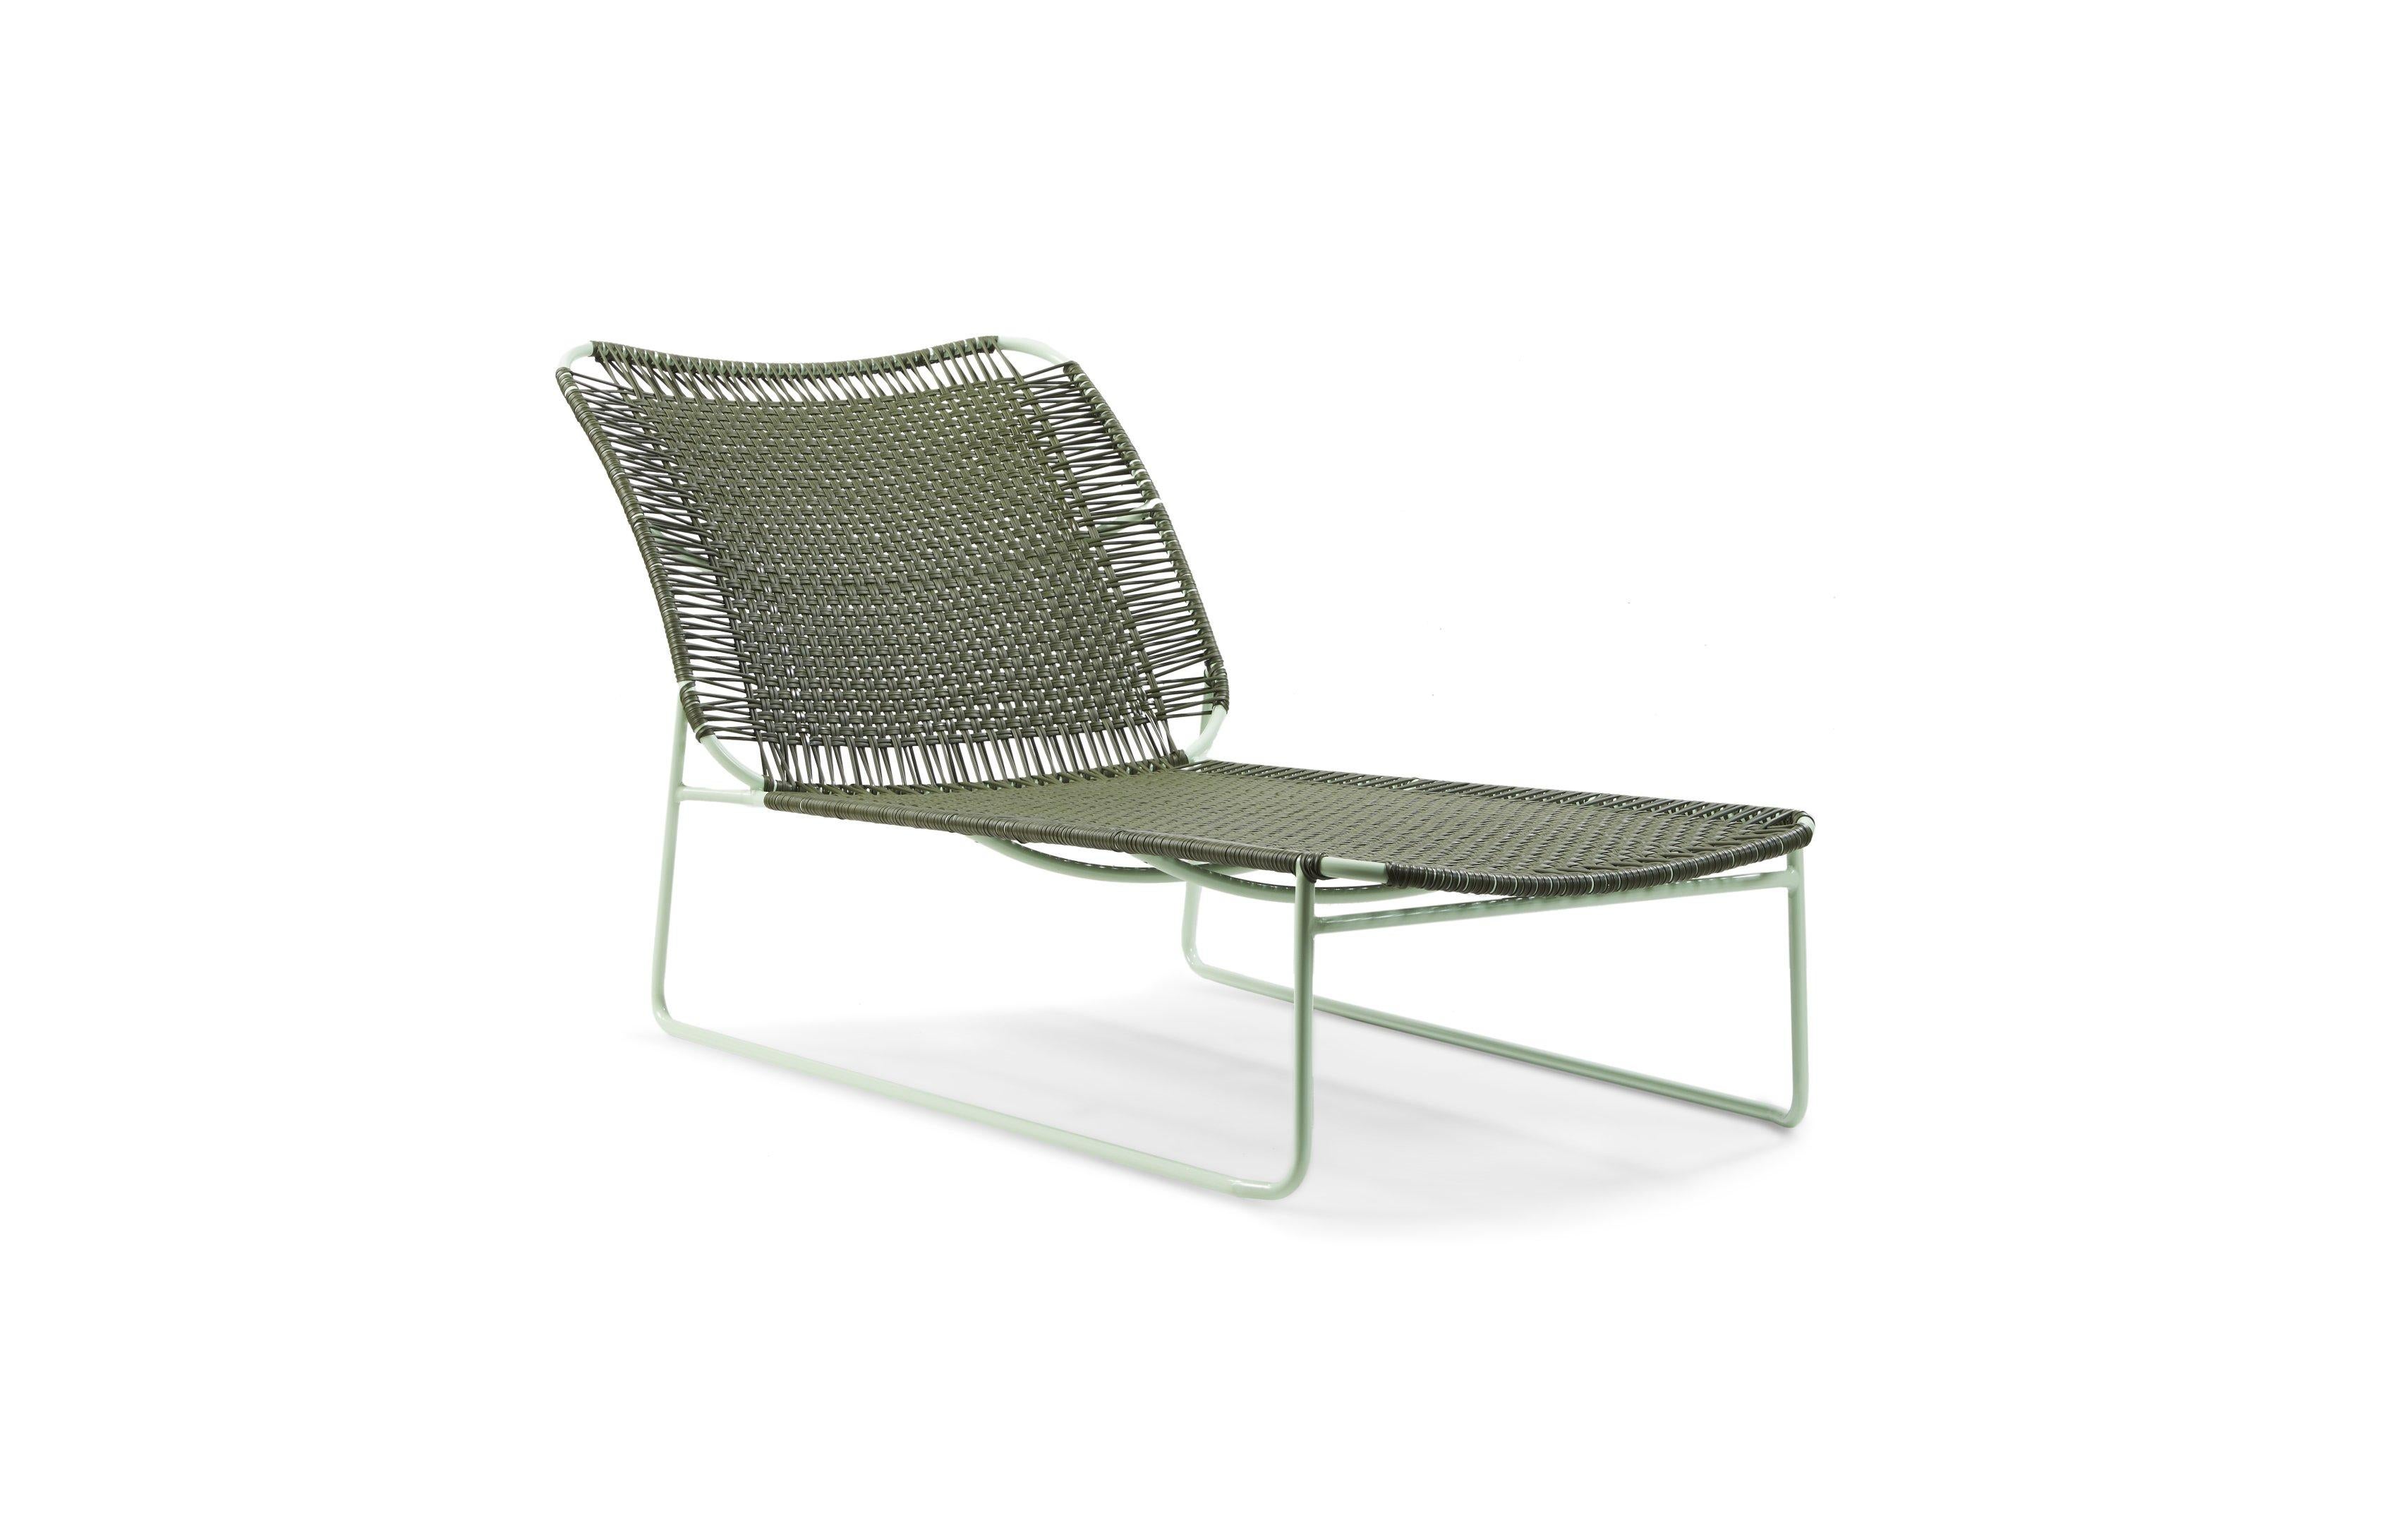 Olive Cielo daybed by Sebastian Herkner
Dimensions: 172 x 78 x 83 cm
Materials: recycled plastic, metal

Made from recycled plastic strings and galvanized, powder-coated steel, the bed is available in five clearways: mint/ black, black-black,